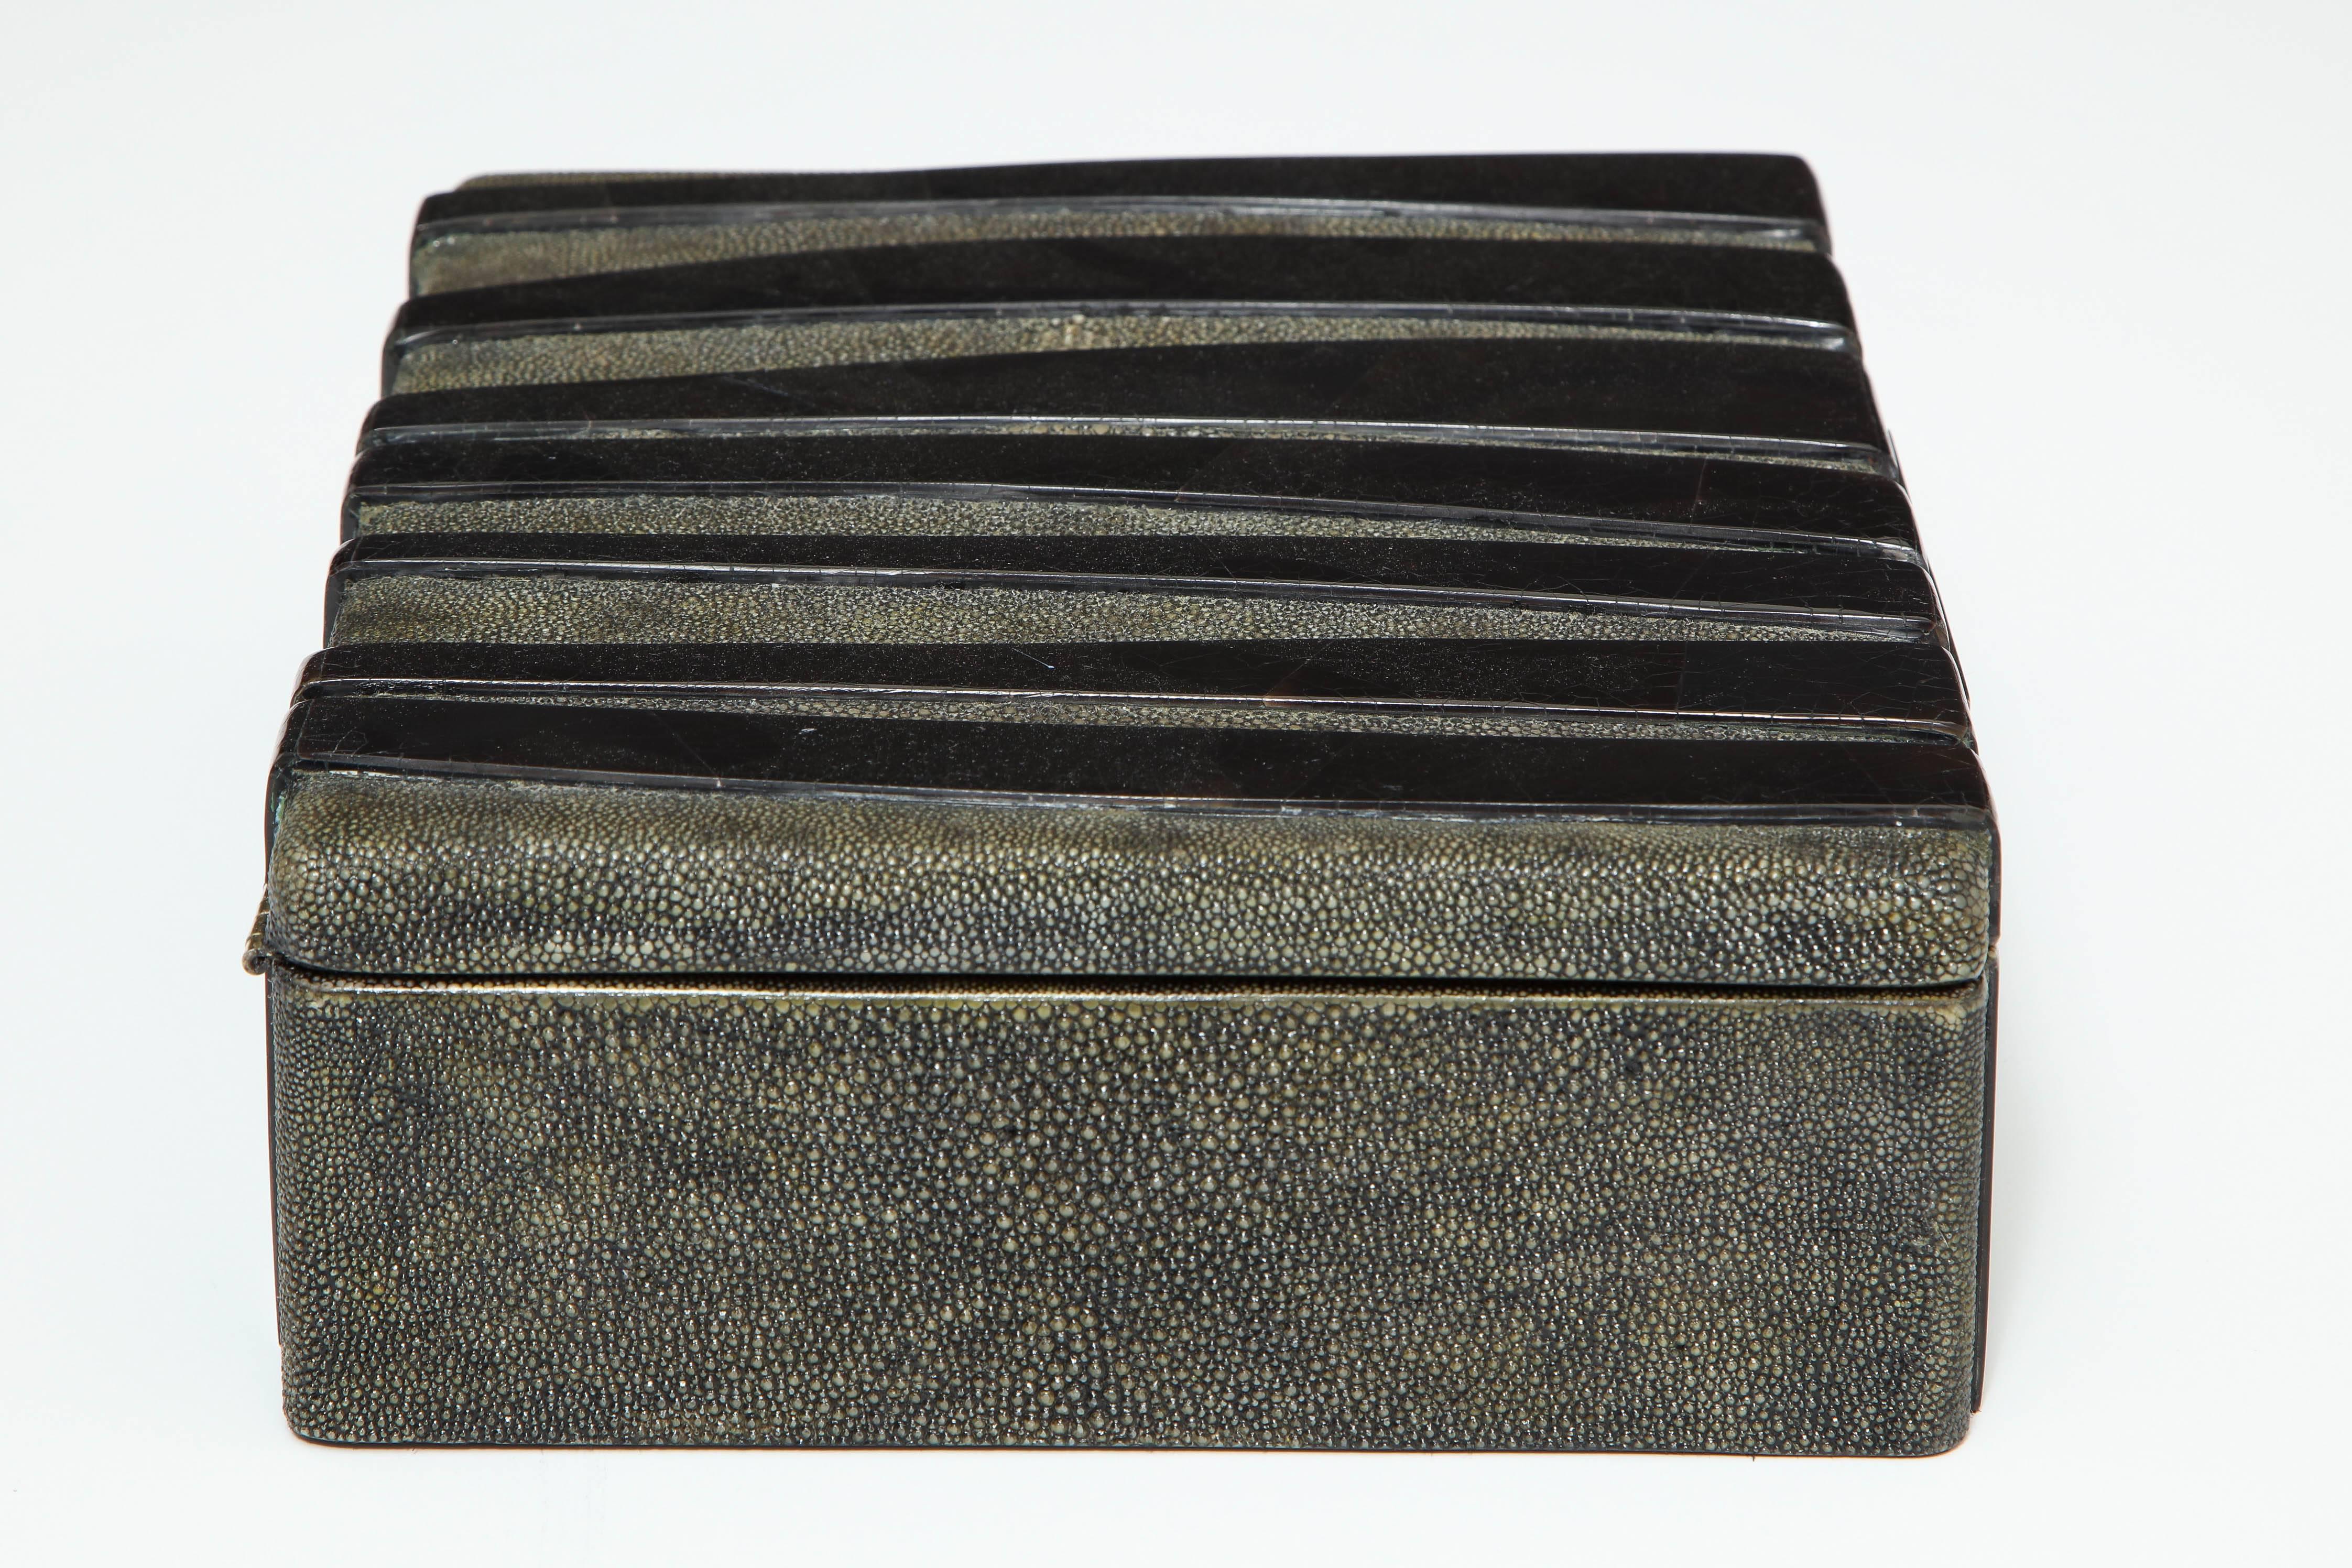 Hand-Crafted Shagreen Decorative Box, Black Shagreen and Palm Wood Details